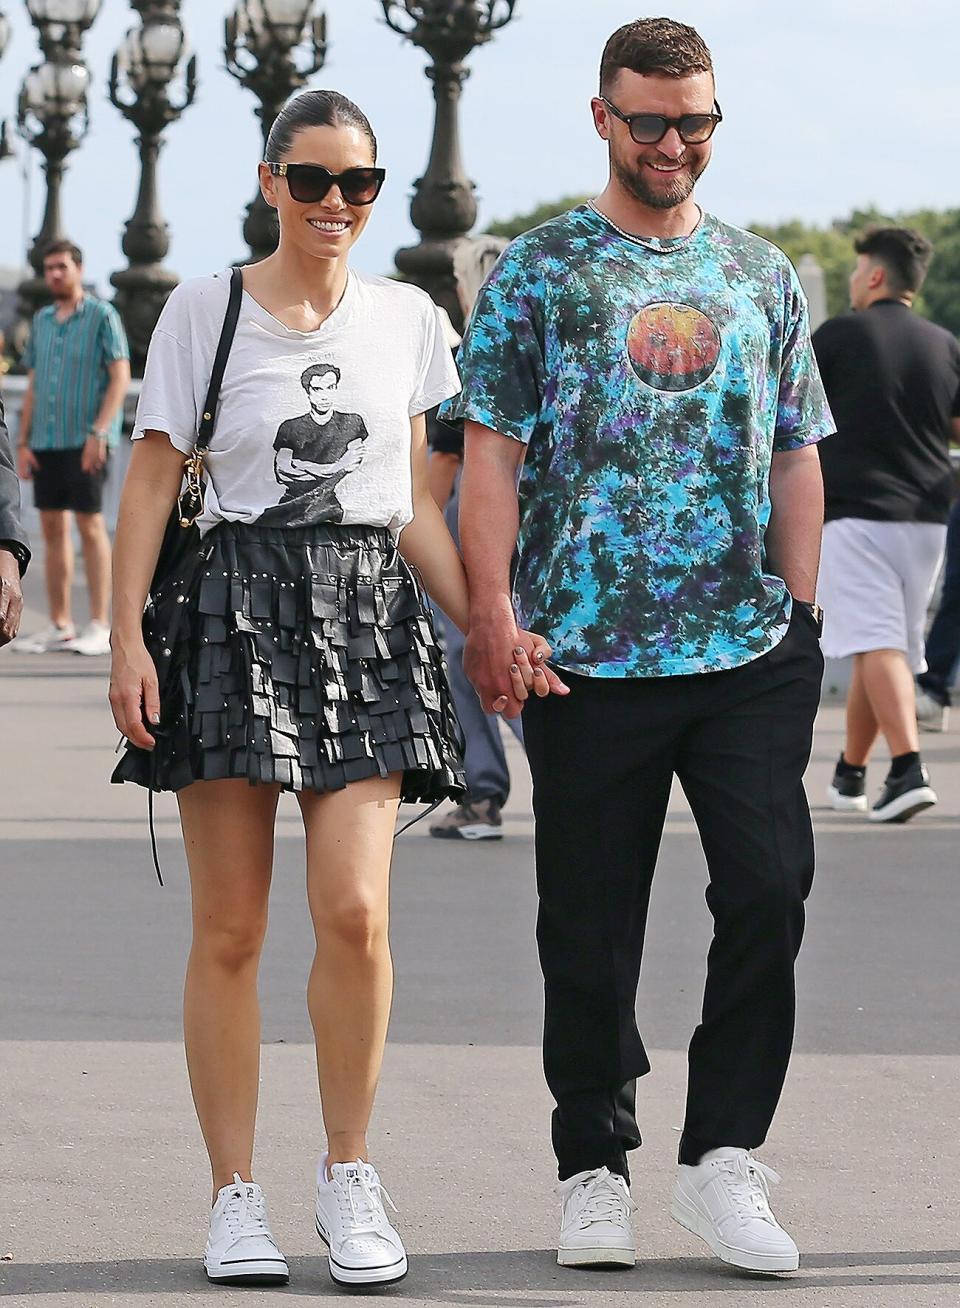 Justin Timberlake and Jessica Biel went for a walk in Paris on the Alexandre III bridge